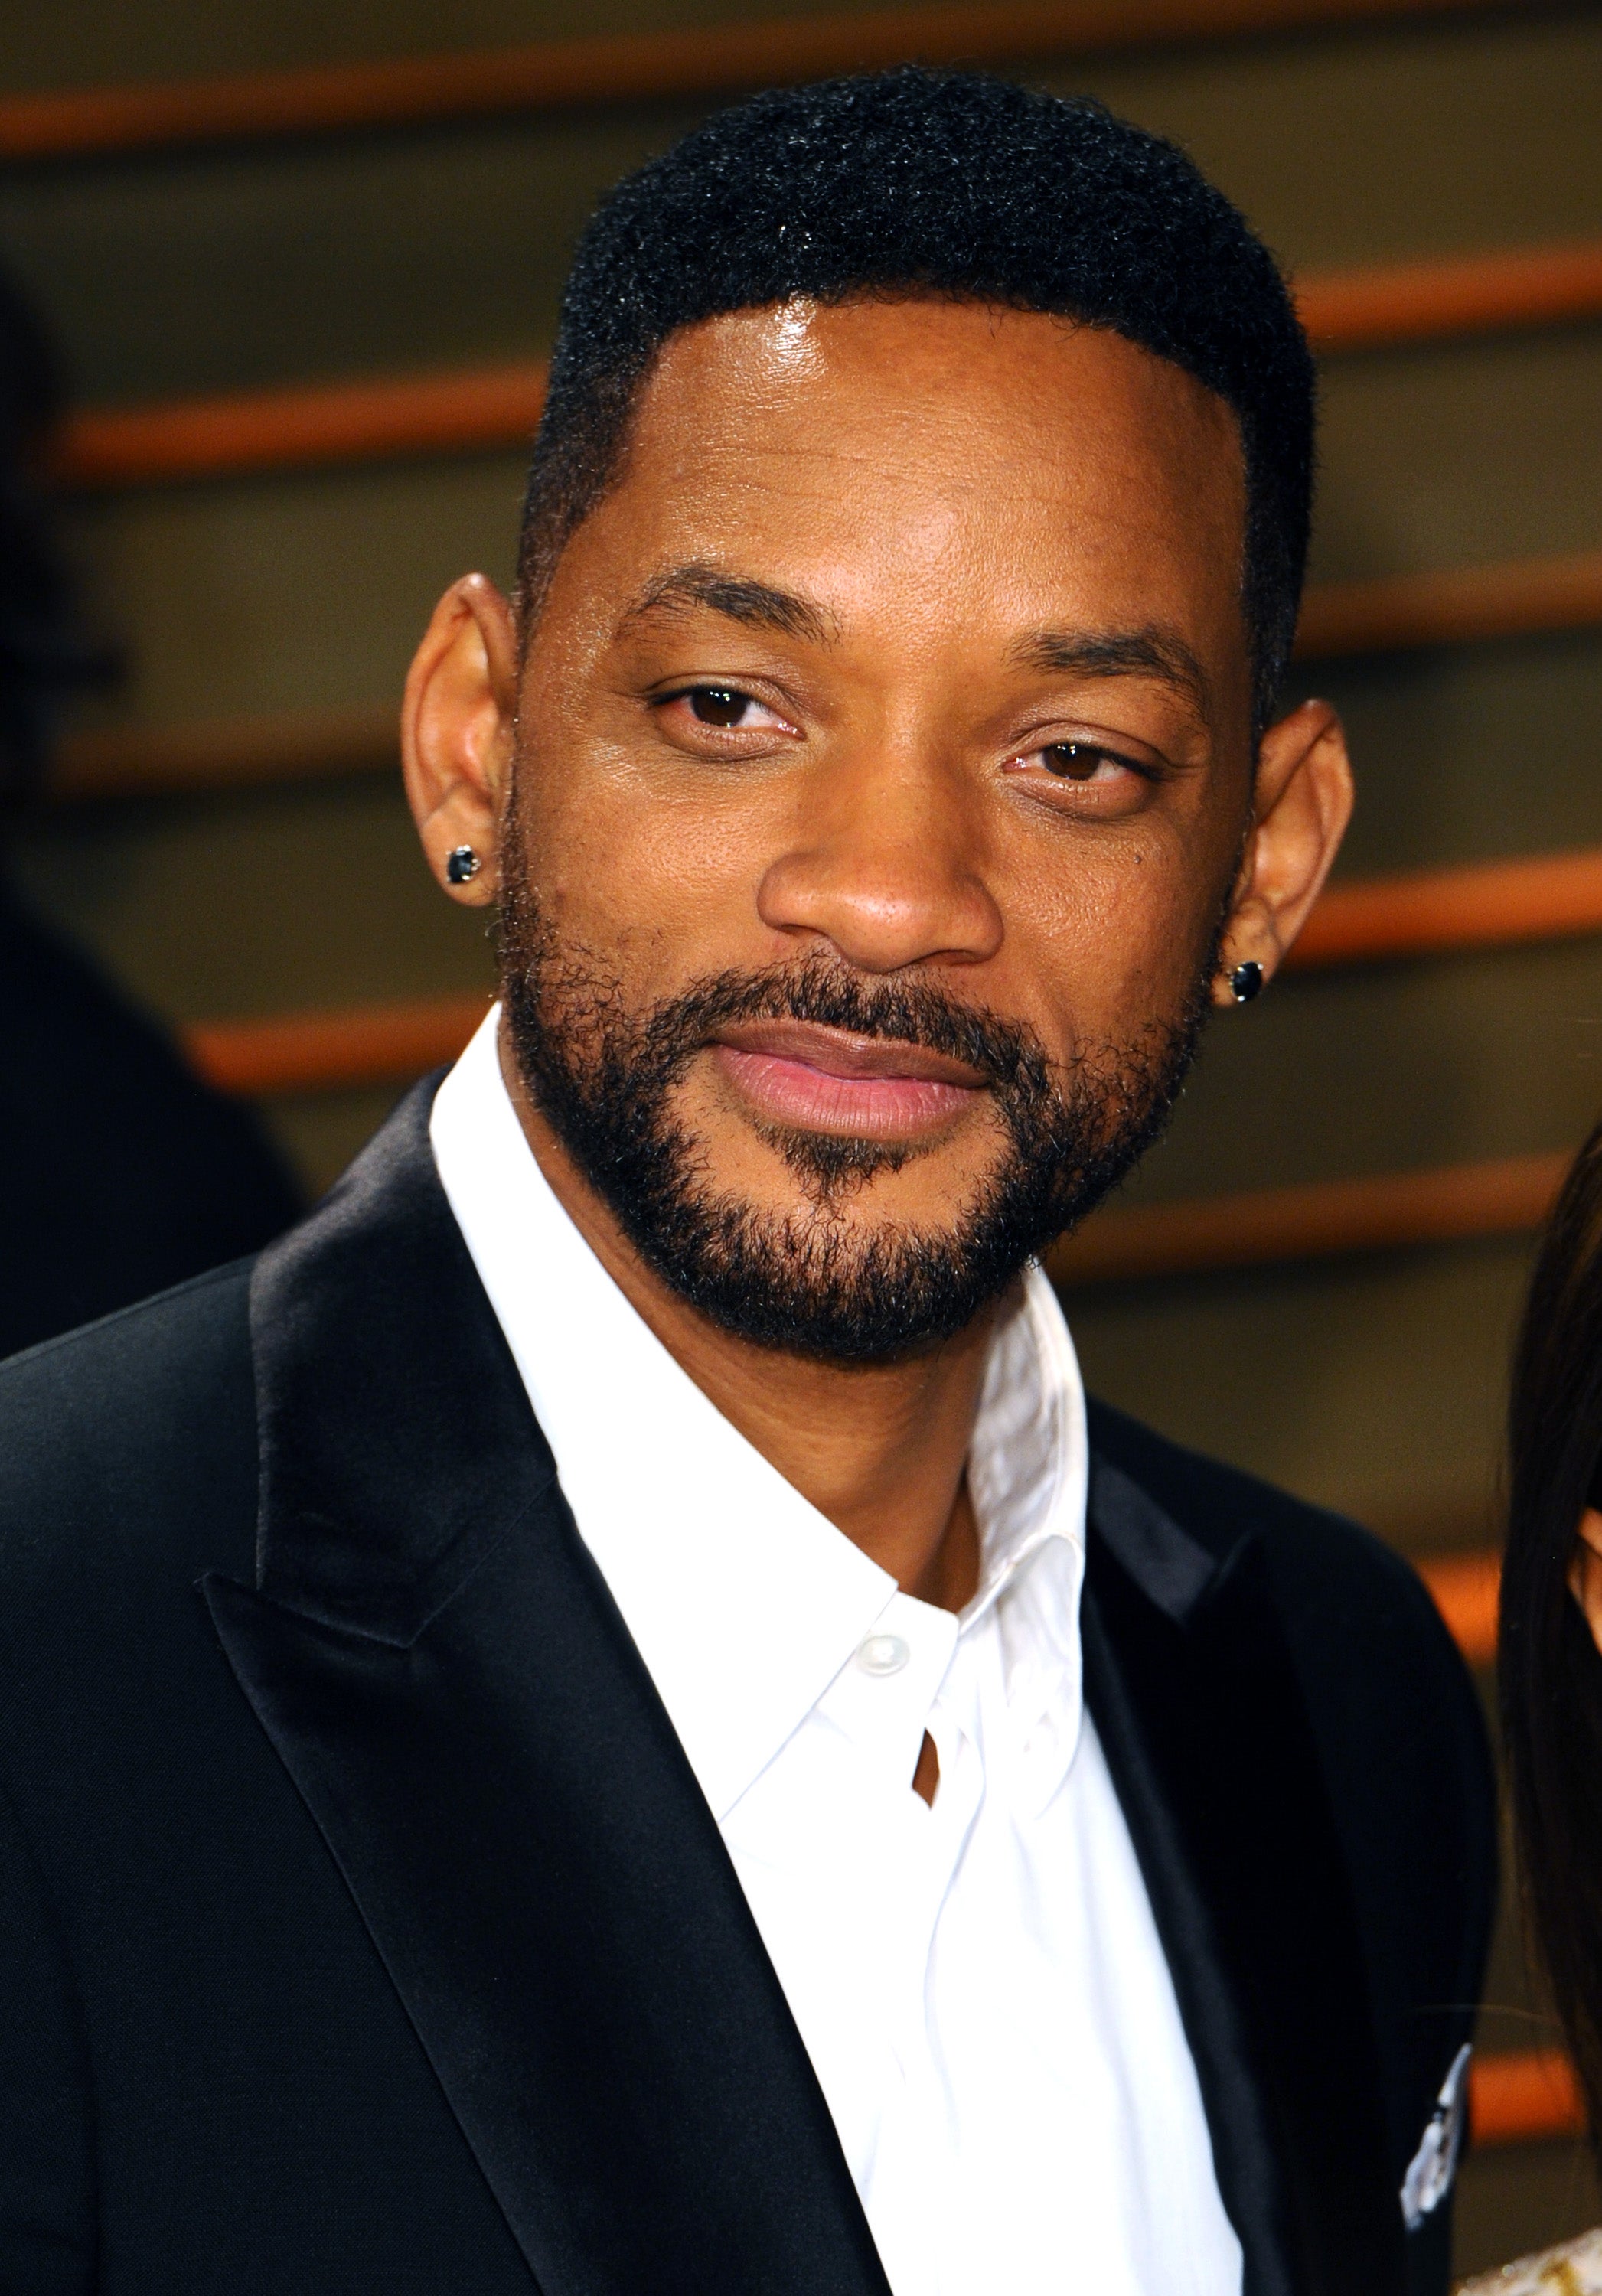 Will Smith's Take on Racism in Hollywood Has Us Scratching Our Heads
